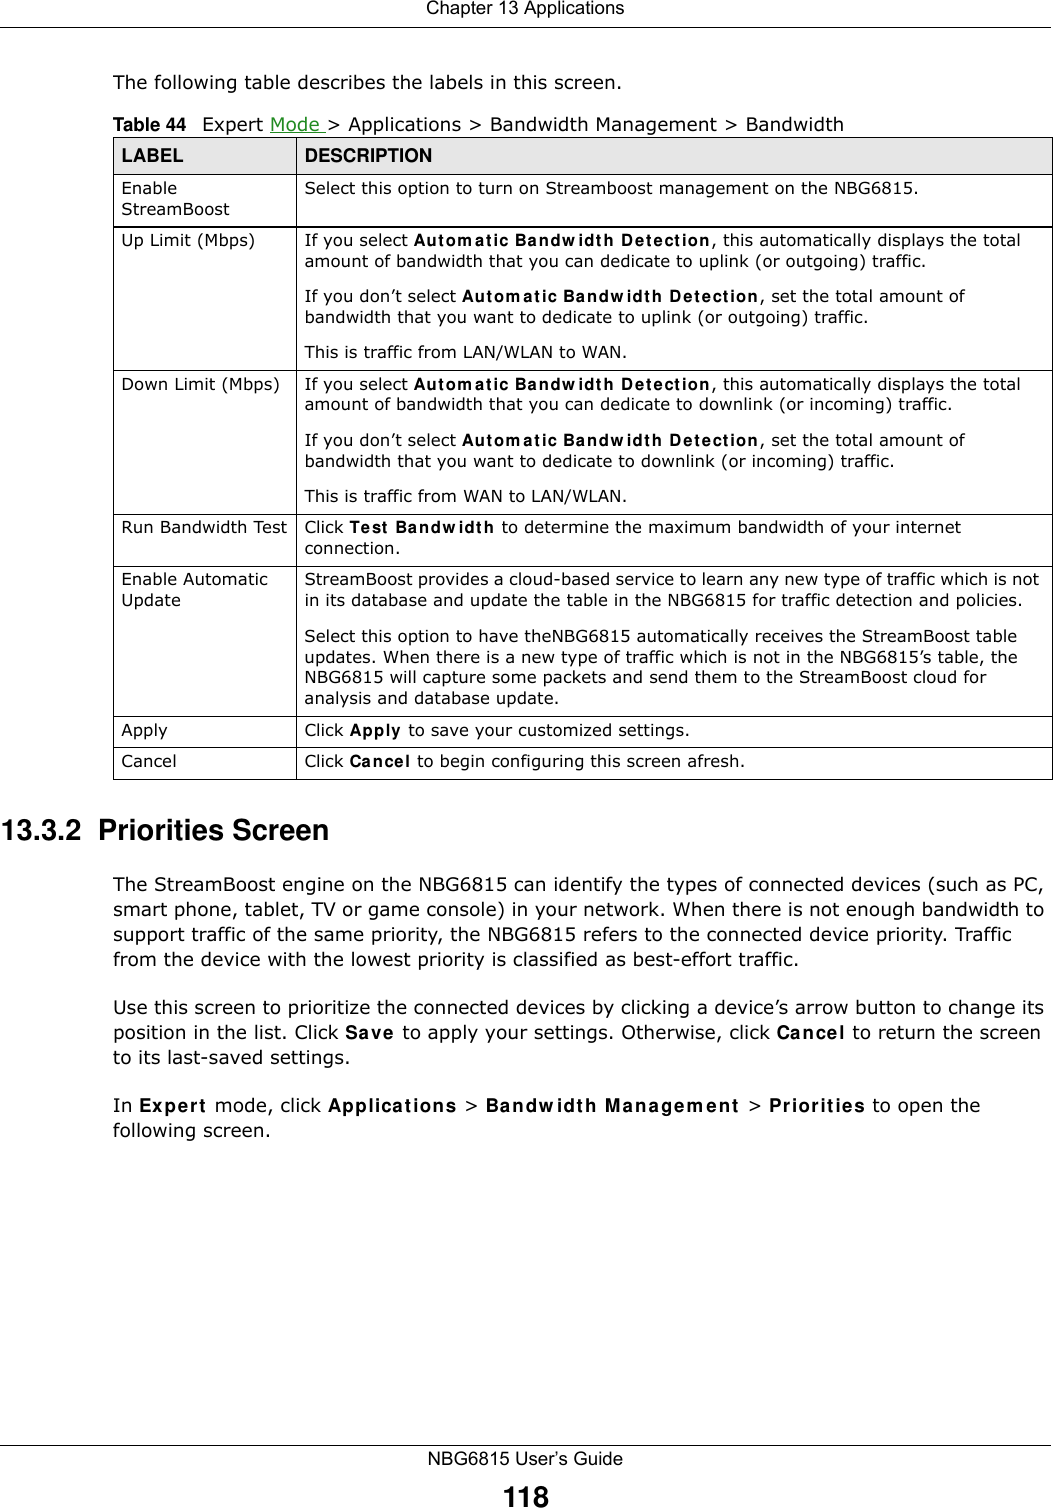 Chapter 13 ApplicationsNBG6815 User’s Guide118The following table describes the labels in this screen.13.3.2  Priorities ScreenThe StreamBoost engine on the NBG6815 can identify the types of connected devices (such as PC, smart phone, tablet, TV or game console) in your network. When there is not enough bandwidth to support traffic of the same priority, the NBG6815 refers to the connected device priority. Traffic from the device with the lowest priority is classified as best-effort traffic.Use this screen to prioritize the connected devices by clicking a device’s arrow button to change its position in the list. Click Save to apply your settings. Otherwise, click Cancel to return the screen to its last-saved settings.In Expert mode, click Applications &gt; Bandwidth Management &gt; Priorities to open the following screen.Table 44   Expert Mode &gt; Applications &gt; Bandwidth Management &gt; BandwidthLABEL DESCRIPTIONEnable StreamBoostSelect this option to turn on Streamboost management on the NBG6815.Up Limit (Mbps) If you select Automatic Bandwidth Detection, this automatically displays the total amount of bandwidth that you can dedicate to uplink (or outgoing) traffic. If you don’t select Automatic Bandwidth Detection, set the total amount of bandwidth that you want to dedicate to uplink (or outgoing) traffic. This is traffic from LAN/WLAN to WAN.Down Limit (Mbps) If you select Automatic Bandwidth Detection, this automatically displays the total amount of bandwidth that you can dedicate to downlink (or incoming) traffic. If you don’t select Automatic Bandwidth Detection, set the total amount of bandwidth that you want to dedicate to downlink (or incoming) traffic. This is traffic from WAN to LAN/WLAN.Run Bandwidth Test Click Test Bandwidth to determine the maximum bandwidth of your internet connection.Enable Automatic UpdateStreamBoost provides a cloud-based service to learn any new type of traffic which is not in its database and update the table in the NBG6815 for traffic detection and policies.Select this option to have theNBG6815 automatically receives the StreamBoost table updates. When there is a new type of traffic which is not in the NBG6815’s table, the NBG6815 will capture some packets and send them to the StreamBoost cloud for analysis and database update.Apply Click Apply to save your customized settings.Cancel Click Cancel to begin configuring this screen afresh.